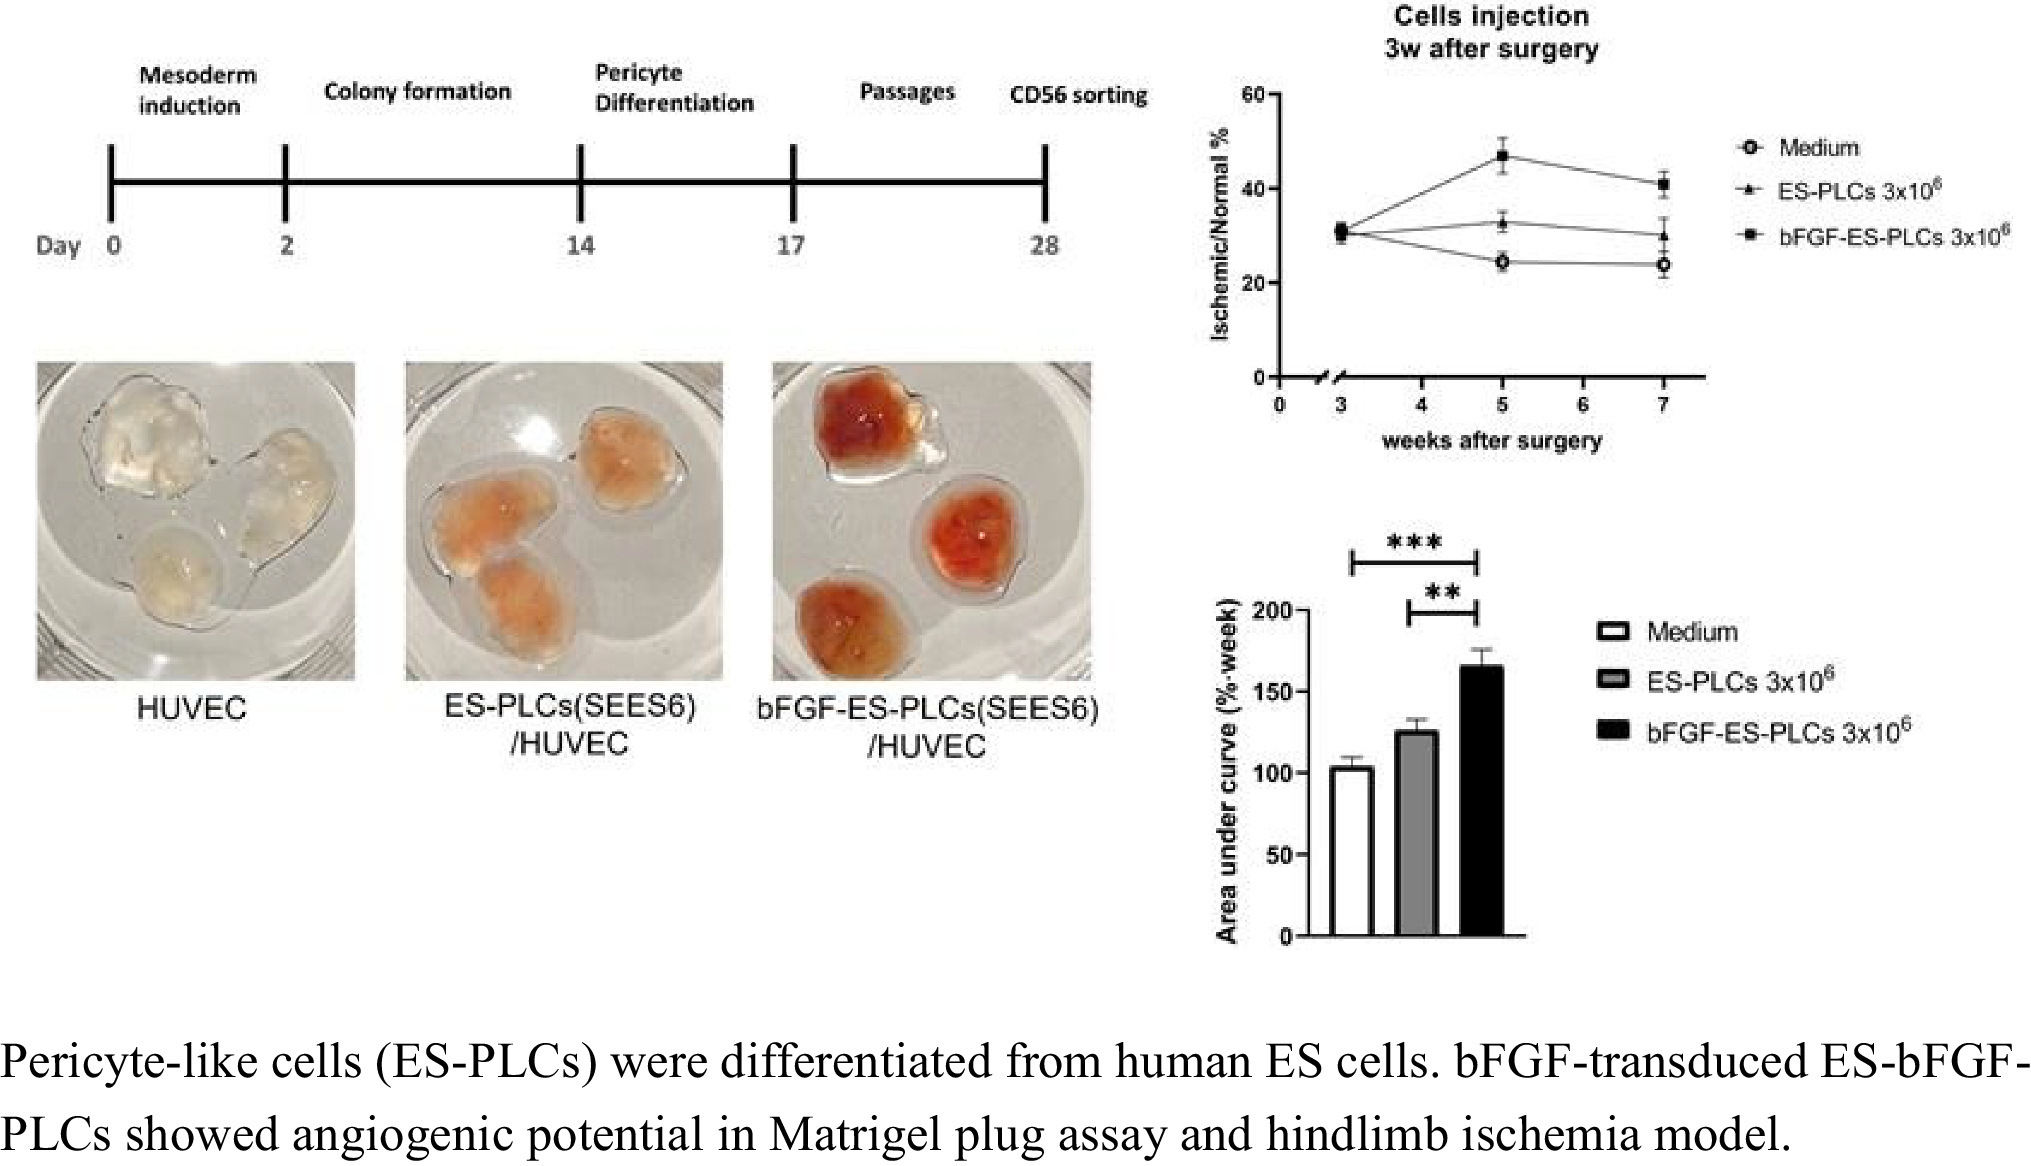 Transplantation of Human Embryonic Stem Cell–Derived Pericyte-Like Cells Transduced with Basic Fibroblast Growth Factor Promotes Angiogenic Recovery in Mice with Severe Chronic Hindlimb Ischemia